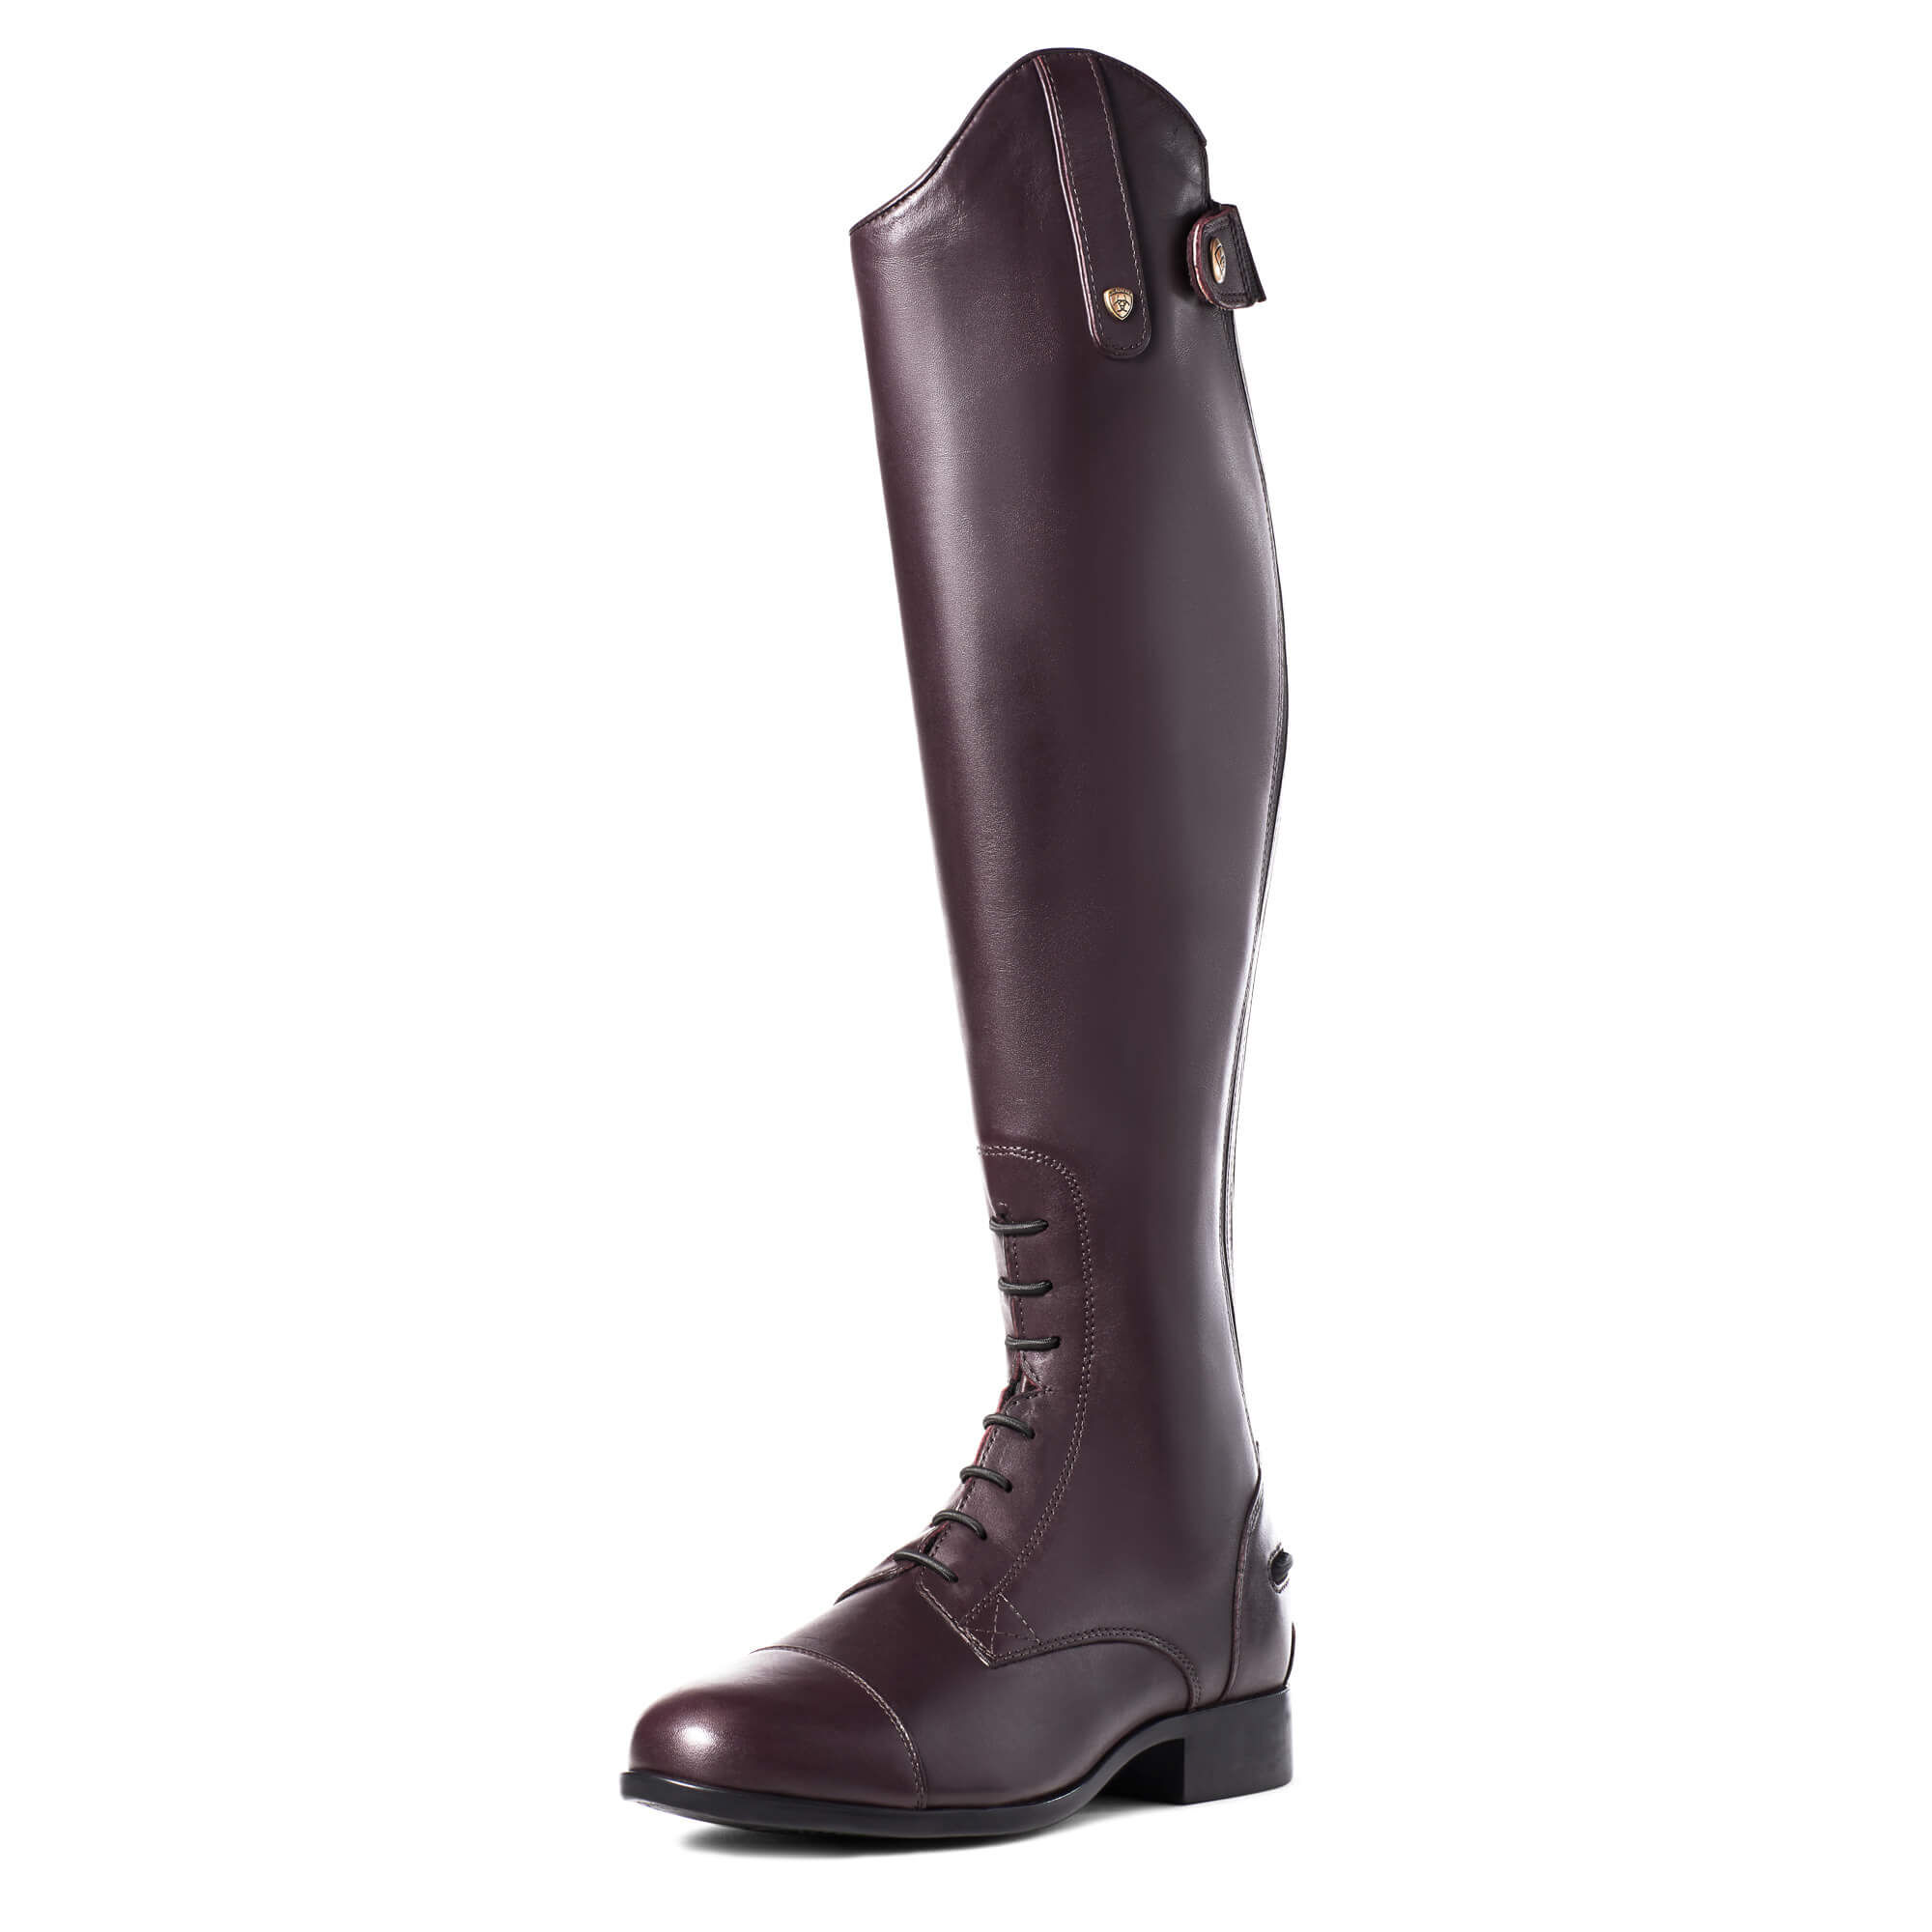 Women's Heritage Contour II Field Zip Tall Riding Boots in Sienna Leather  Full by Ariat